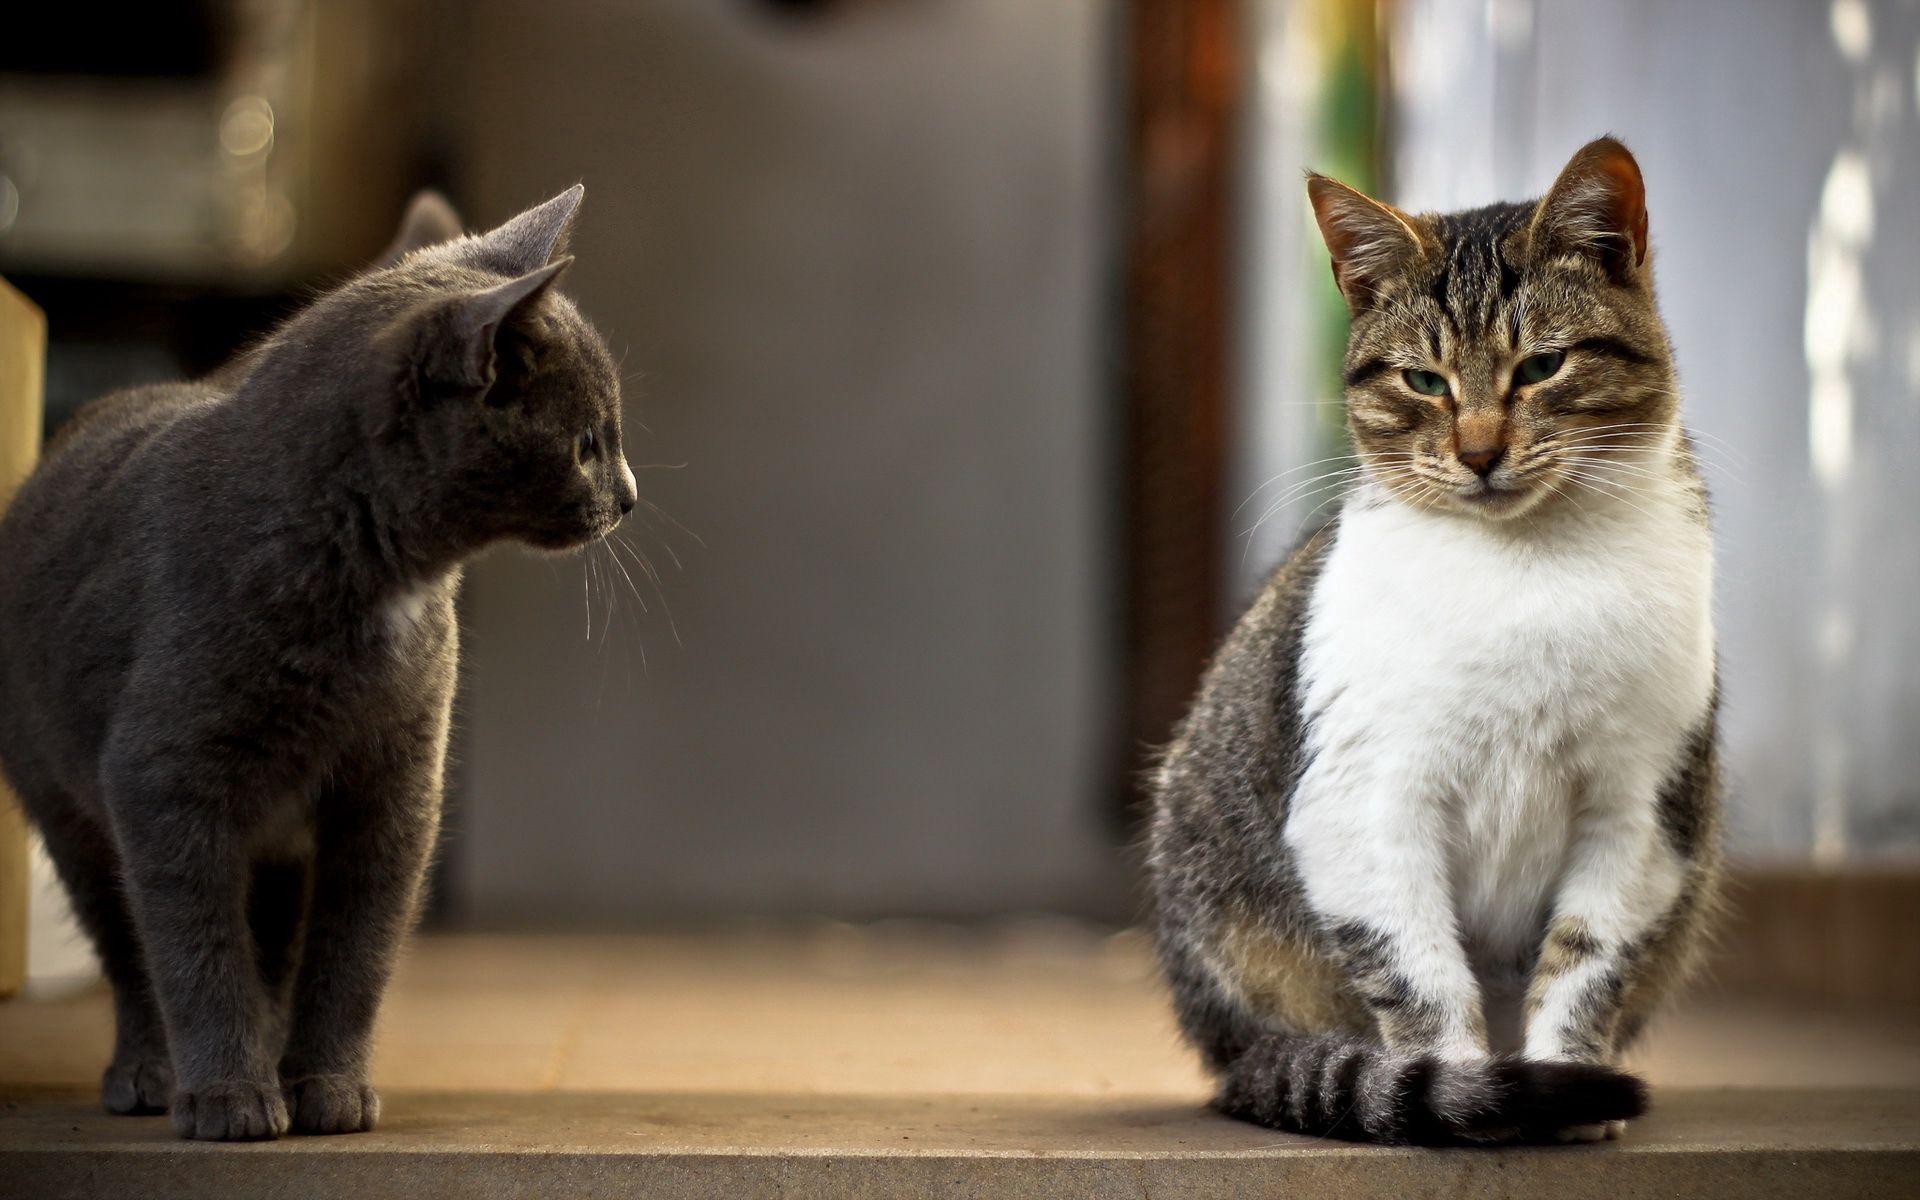 Full HD cats, animals, couple, pair, curiosity, satisfied, content